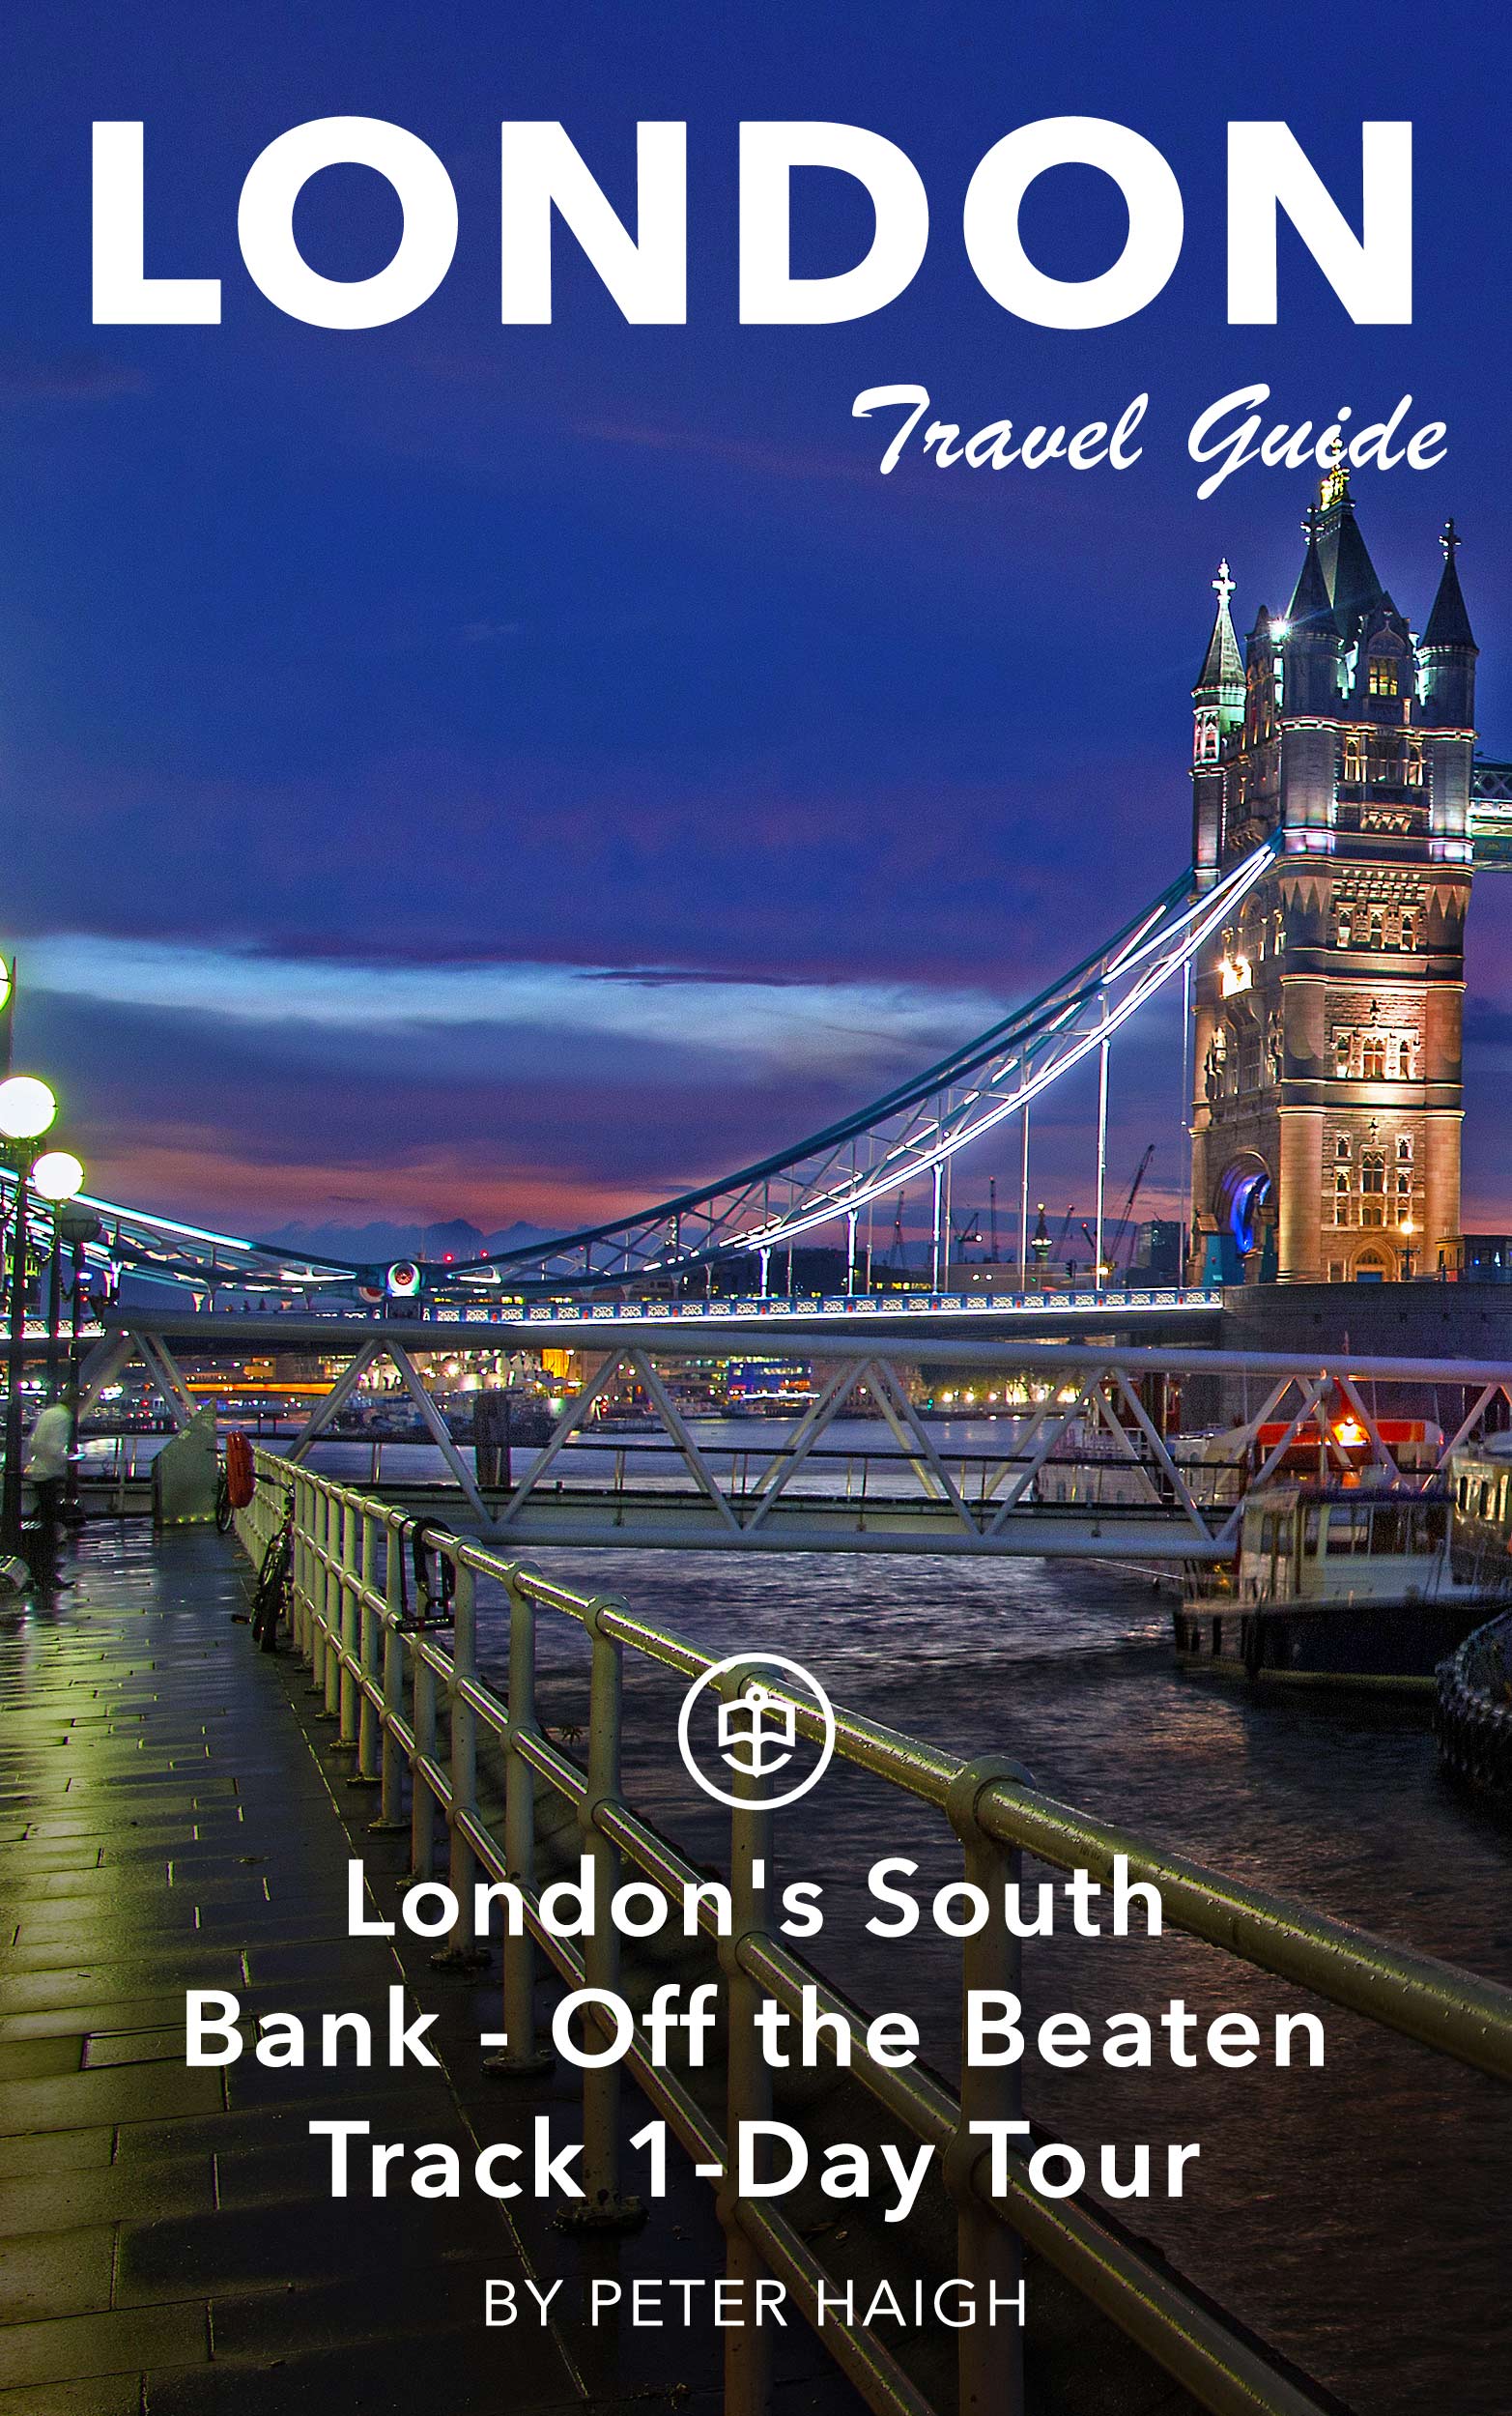 London's South Bank - Off the Beaten Track 1-Day Tour